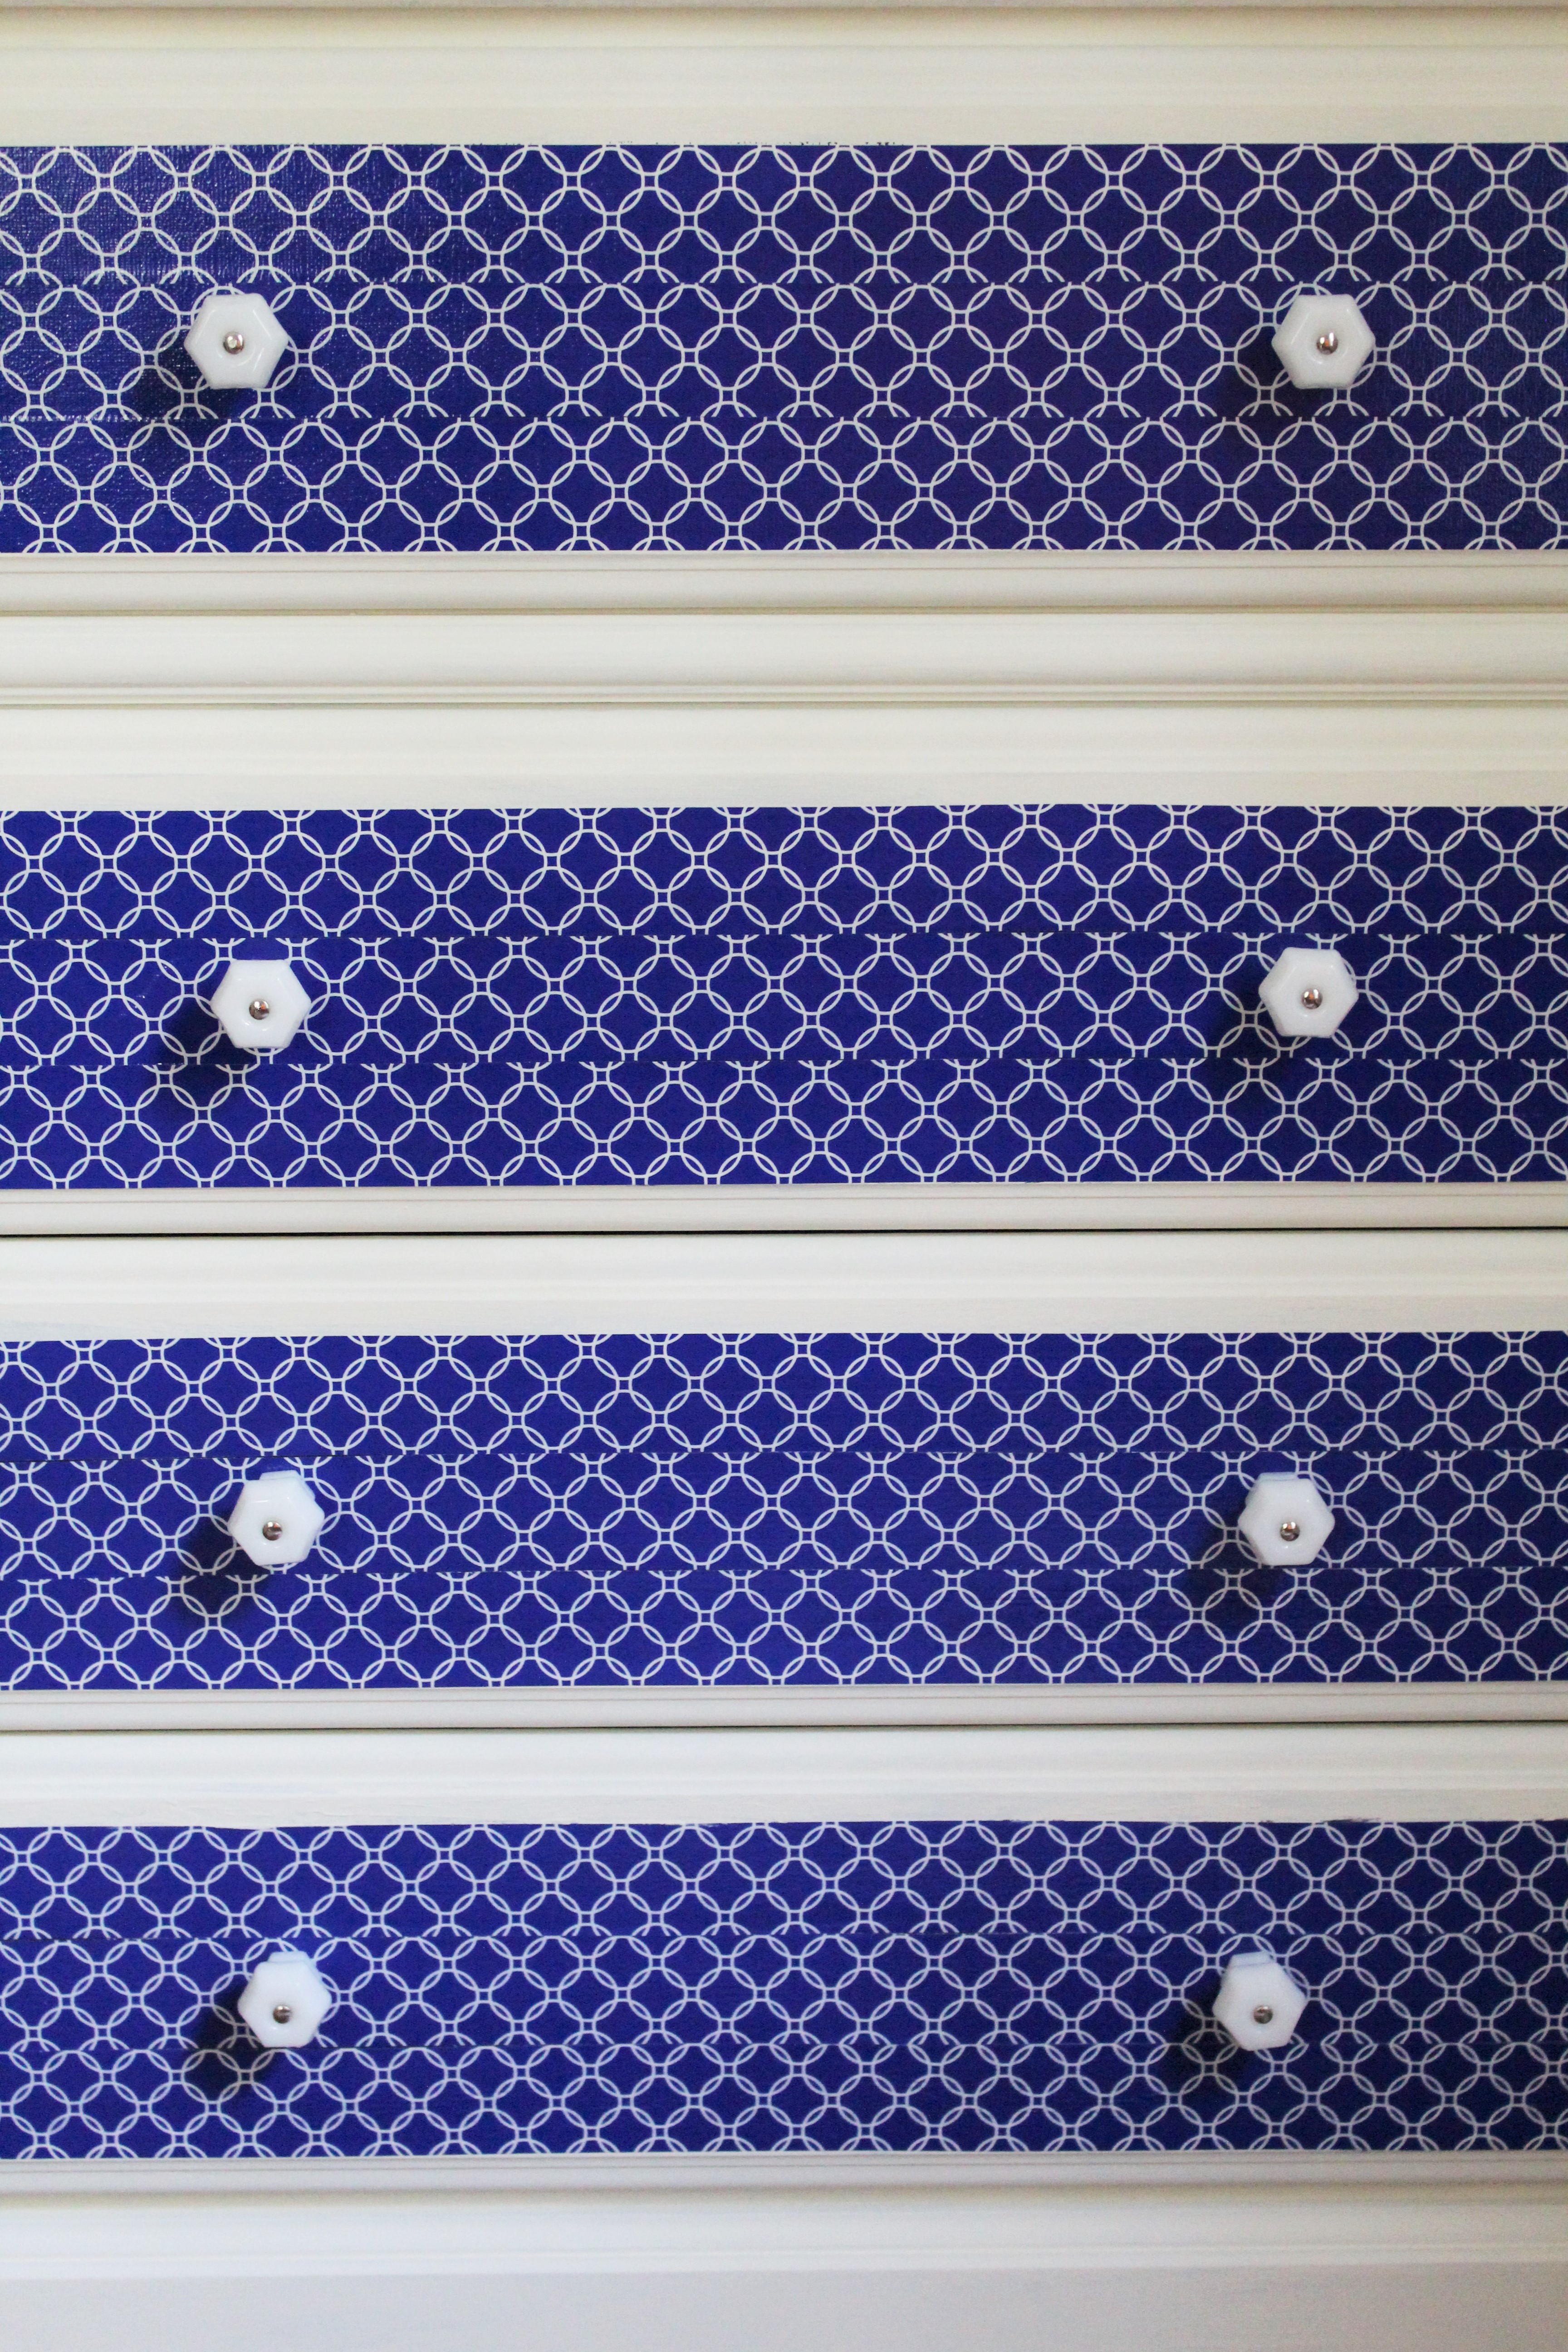 Trash to Treasure Dresser Transformation with chalk paint, duct tape, and D. Lawless Milk Glass knobs